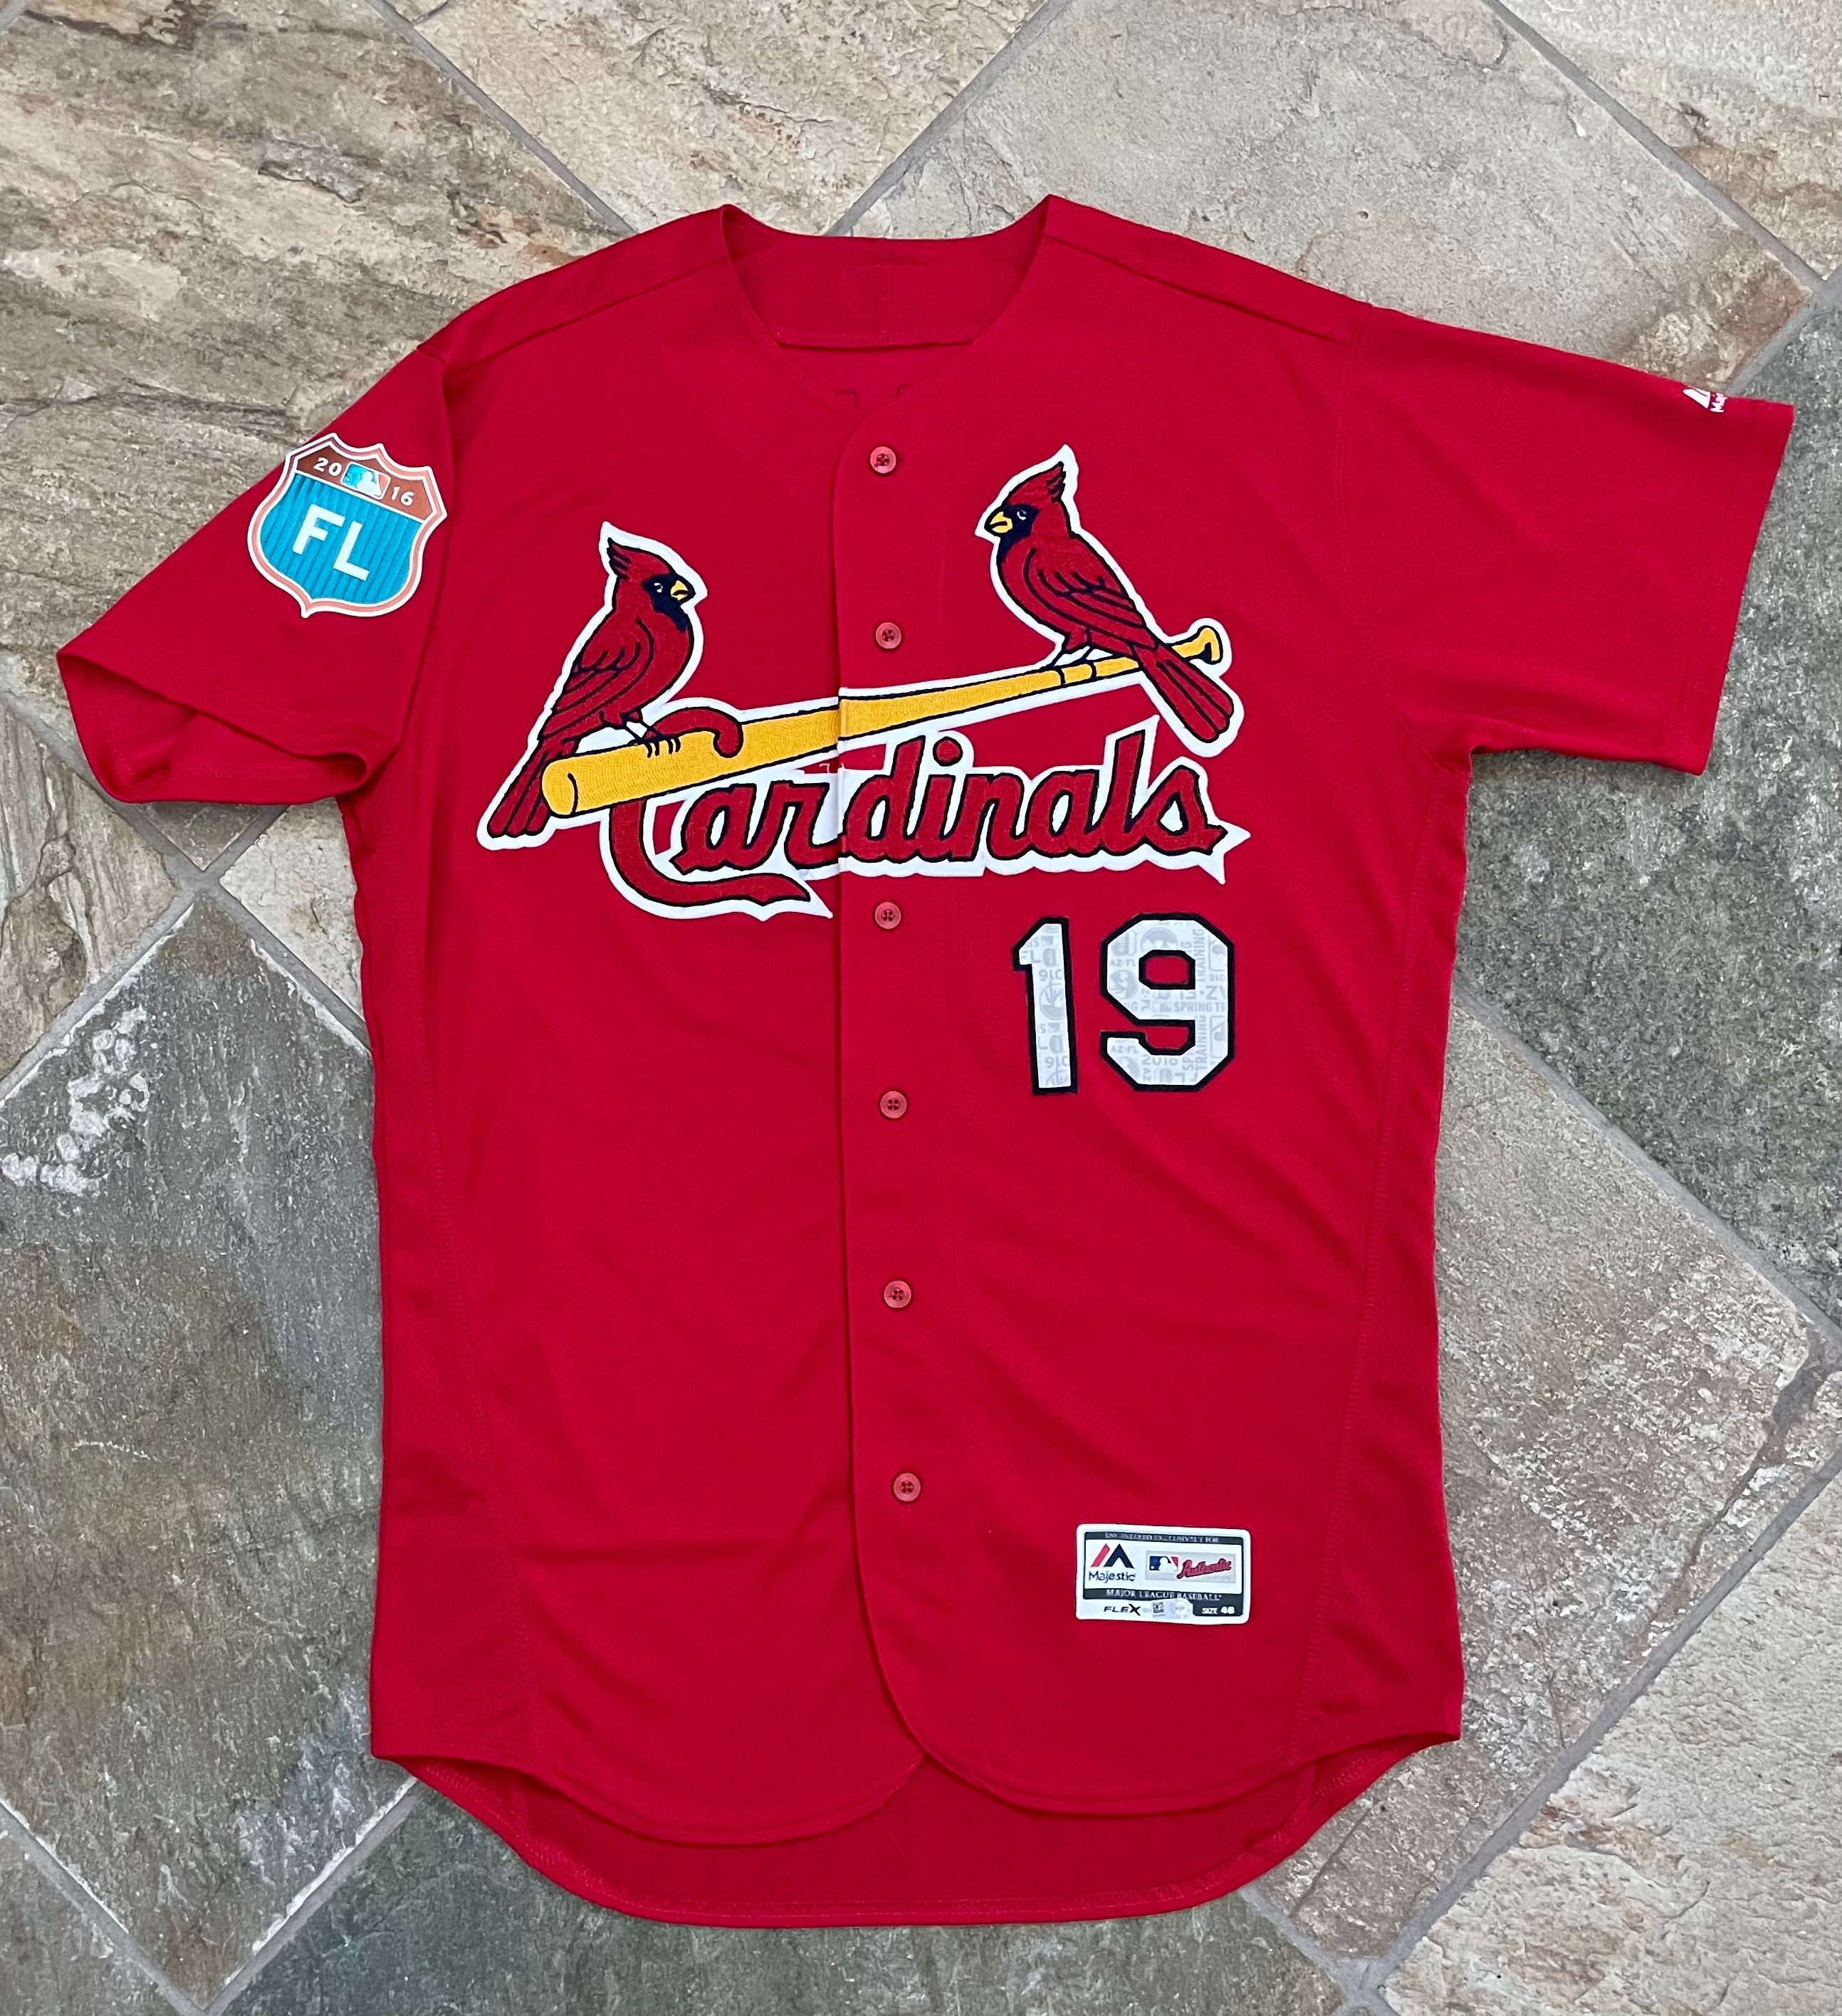 cardinals game used jersey